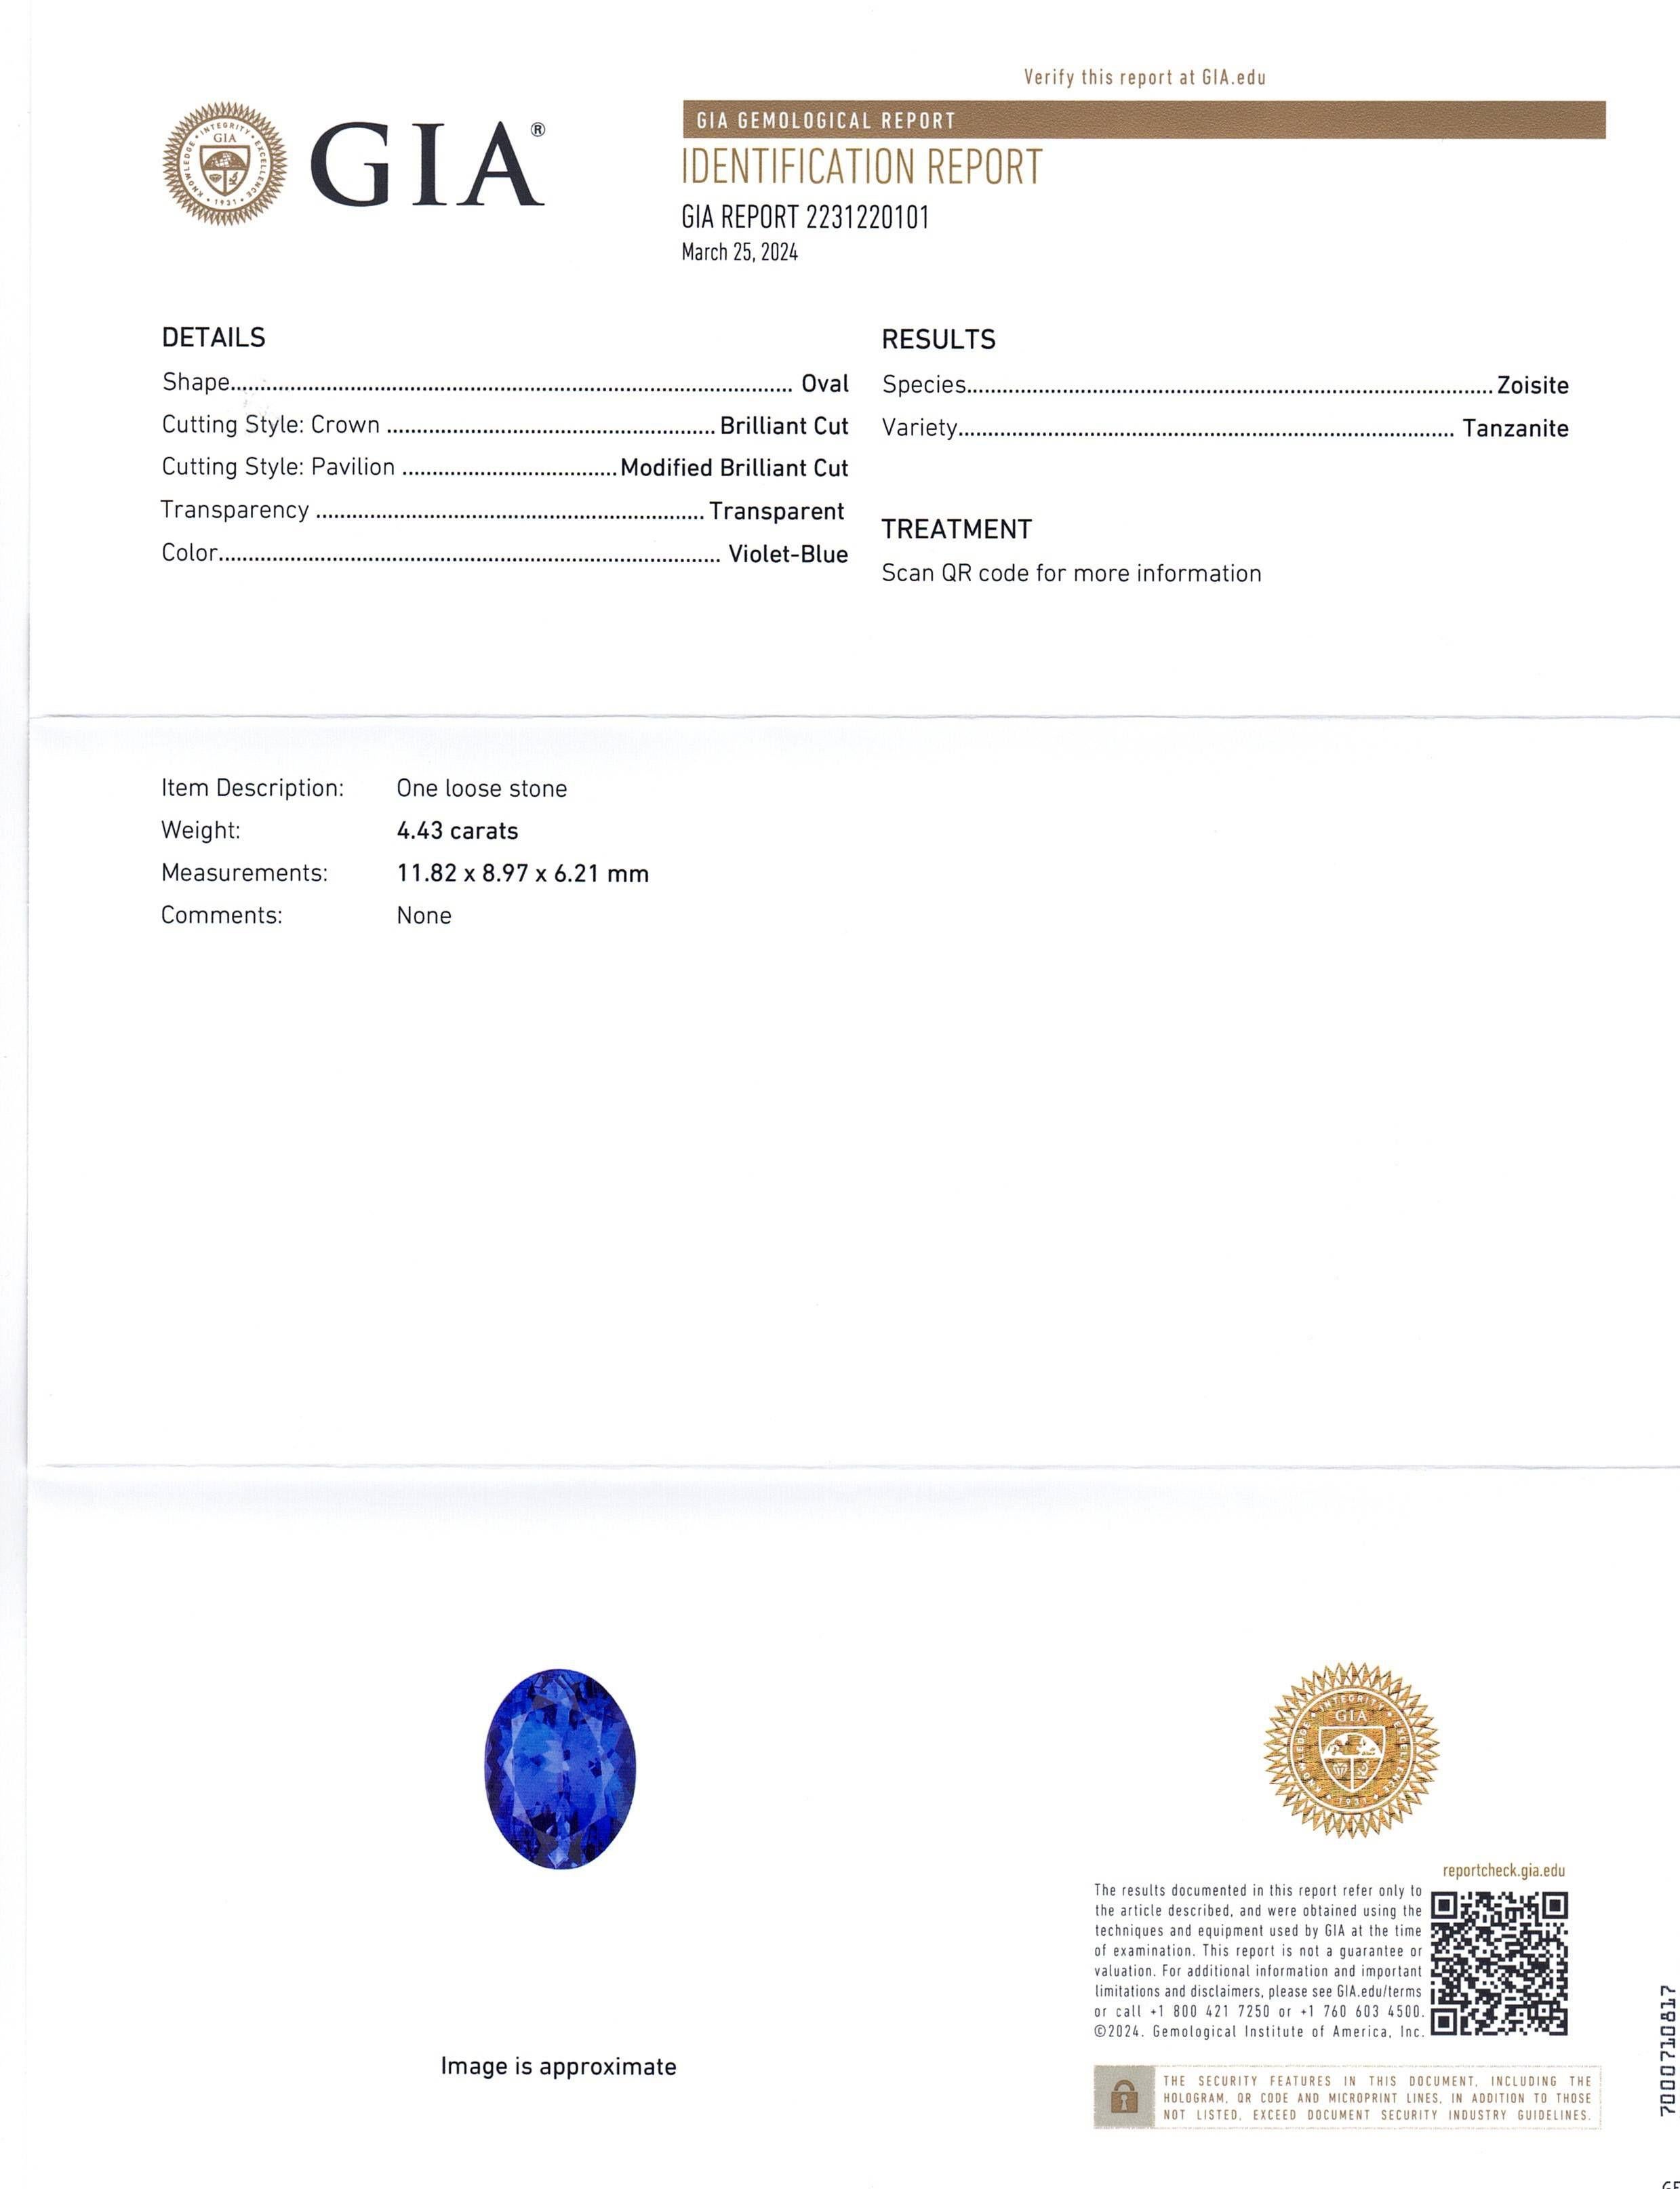 This is a stunning GIA Certified Tanzanite 


The GIA report reads as follows:

GIA Report Number: 2231220101
Shape: Oval
Cutting Style: 
Cutting Style: Crown: Brilliant Cut
Cutting Style: Pavilion: Modified Brilliant Cut
Transparency: